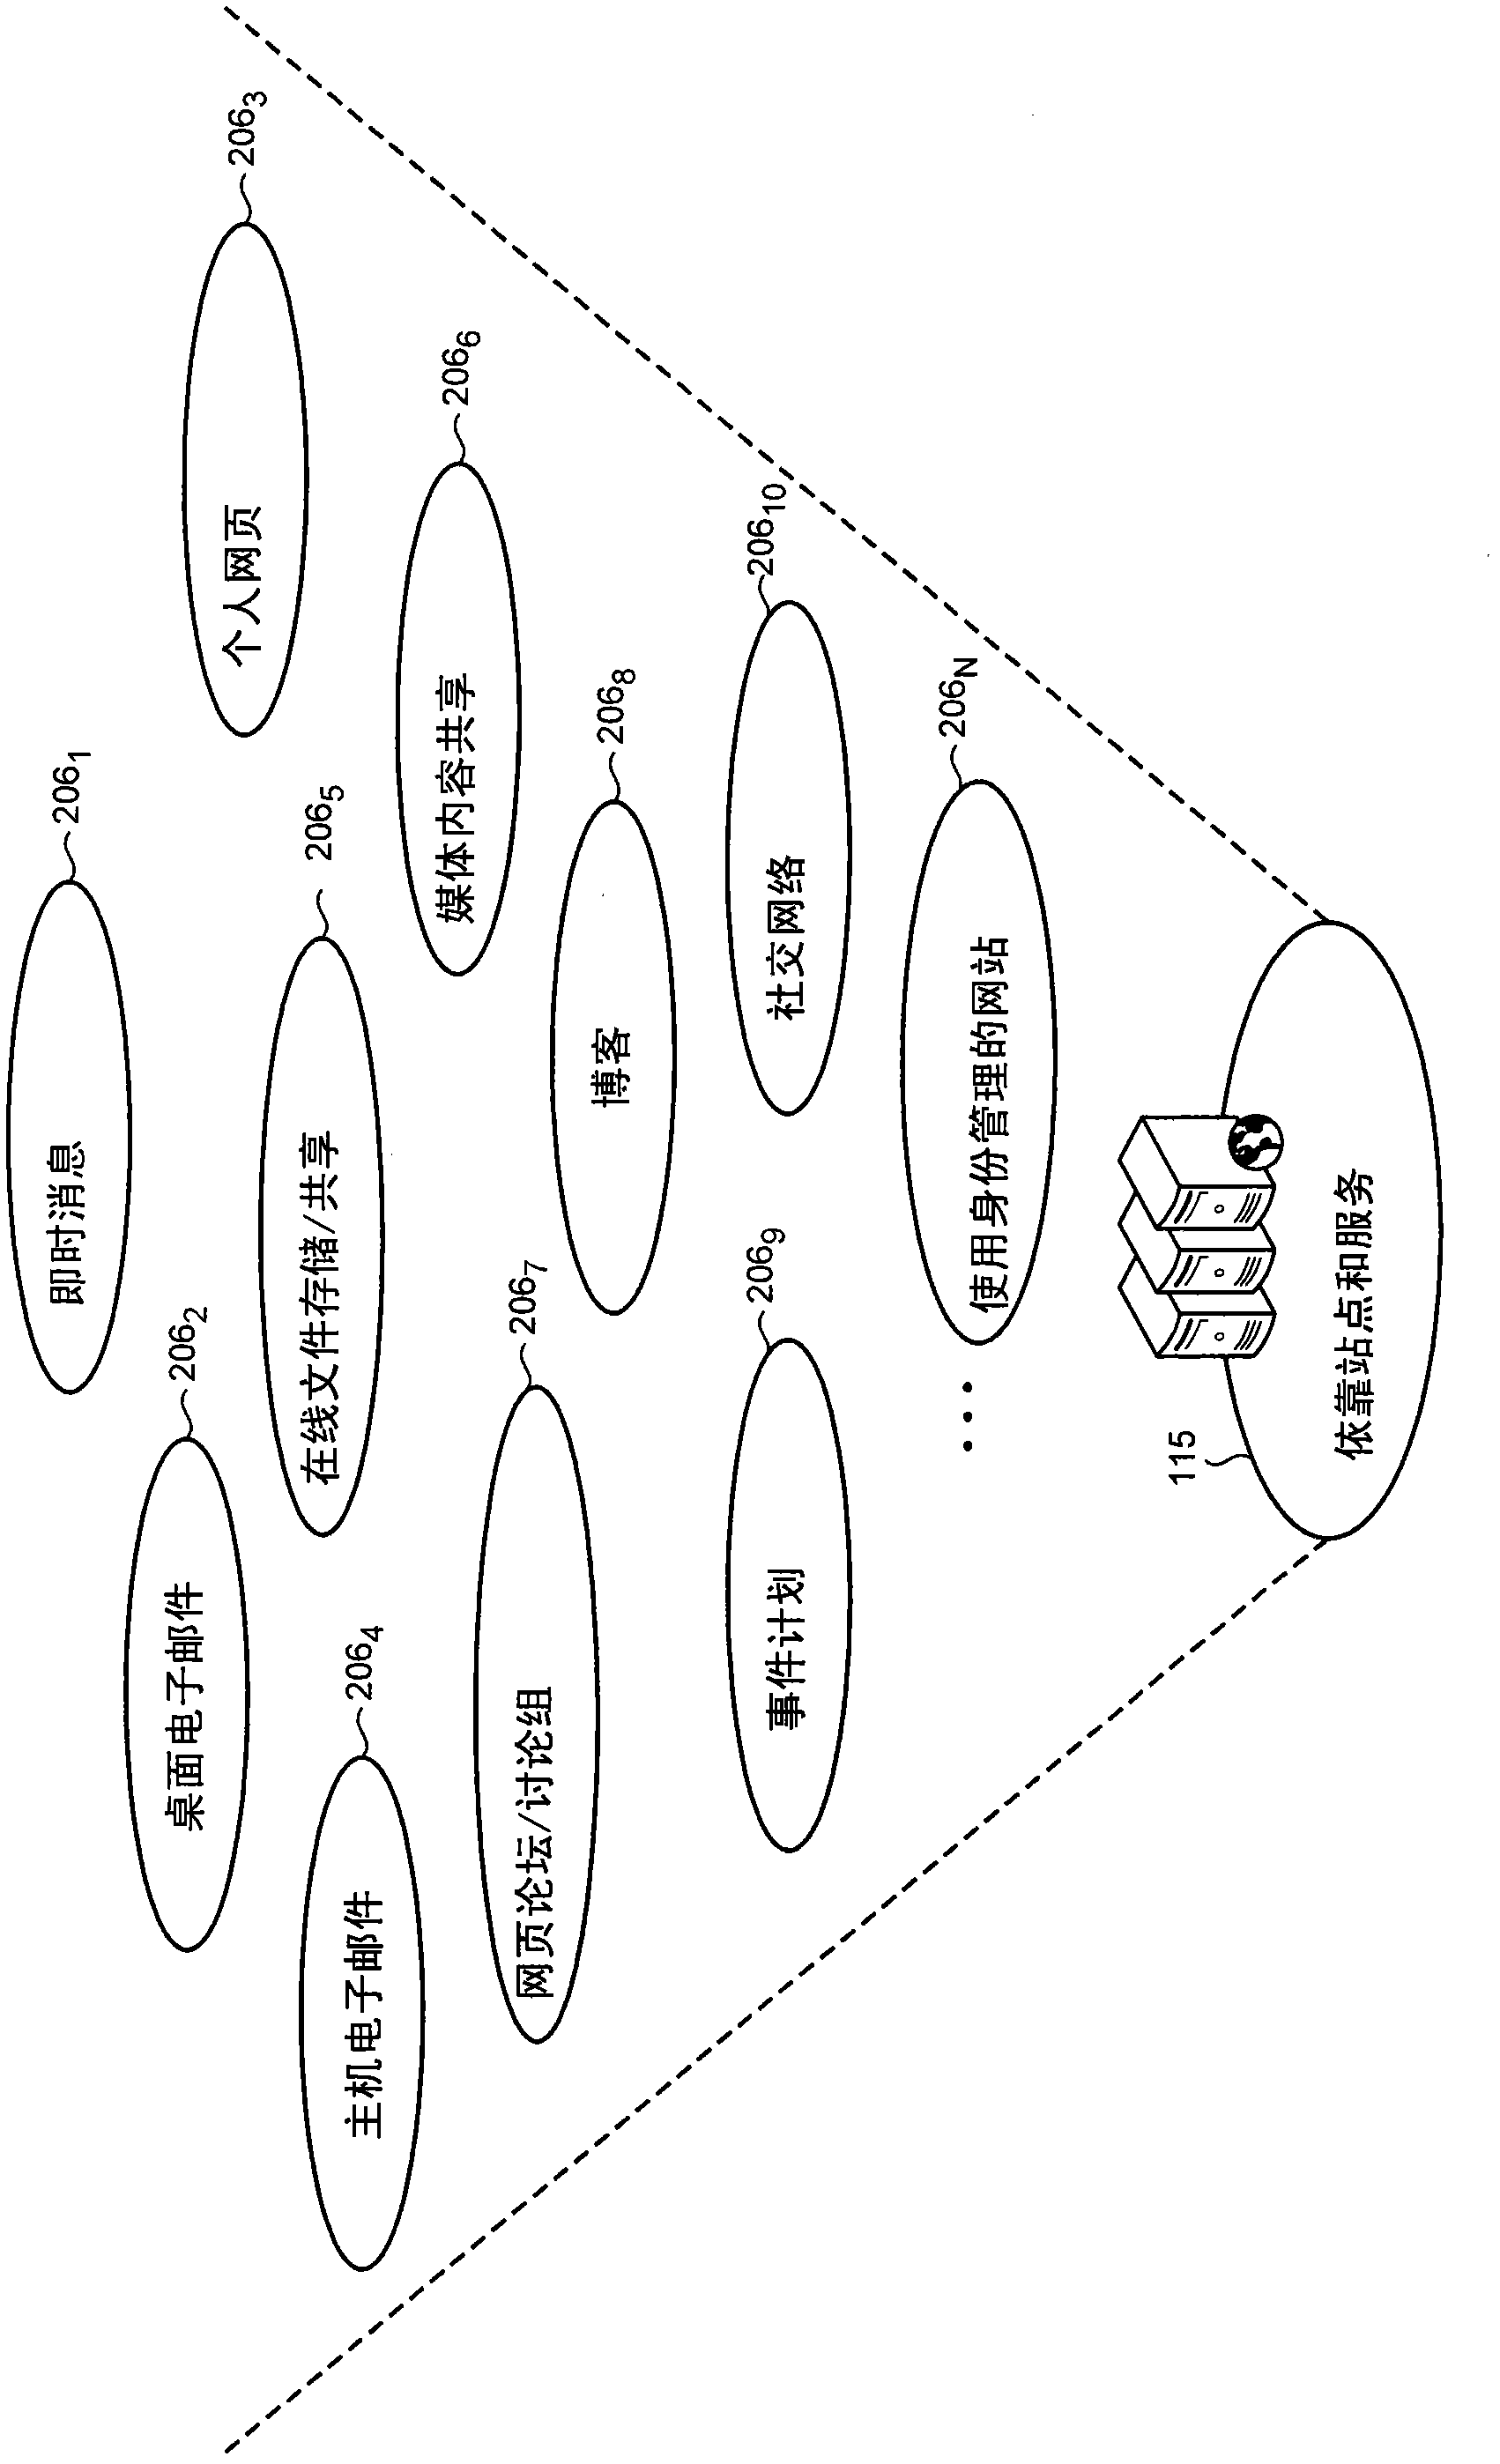 Identity and authentication system using aliases